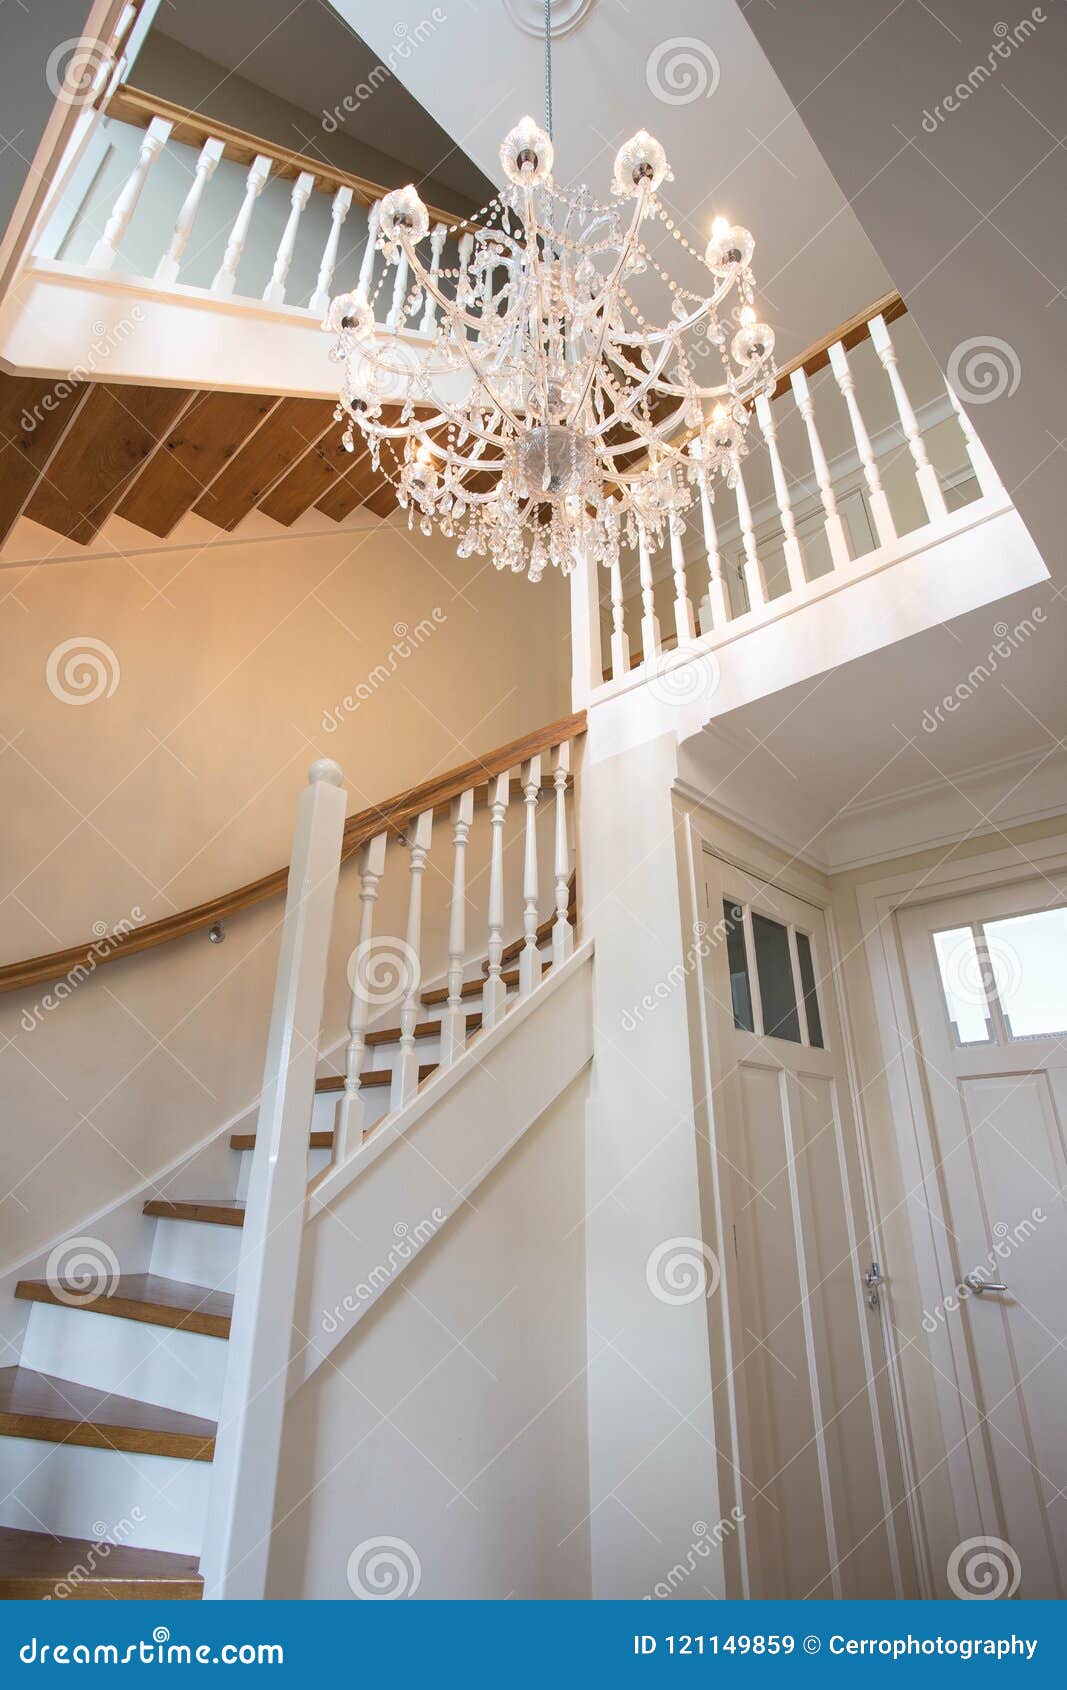 Beautiful Staircase In Victorian Style With Crystal